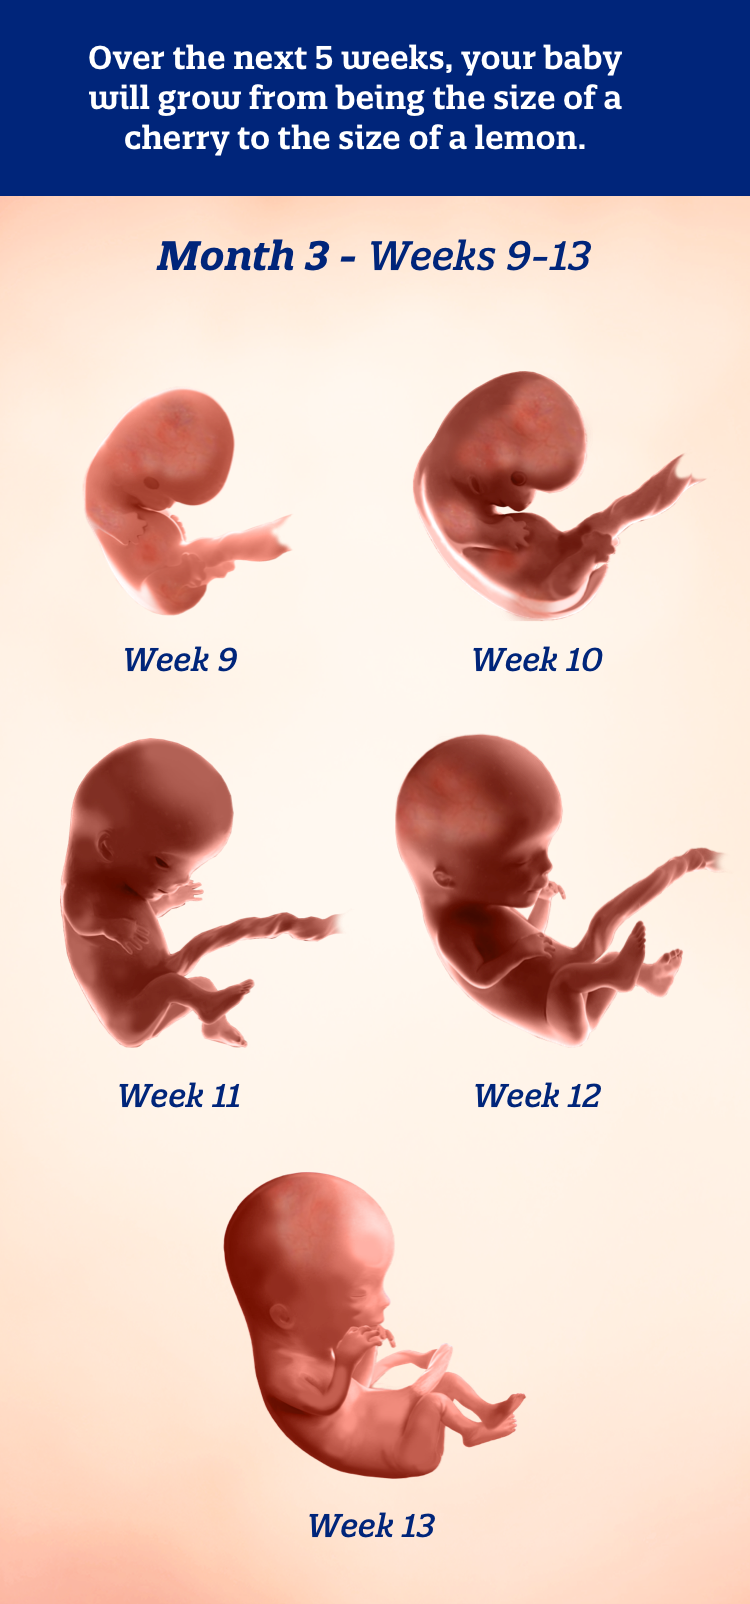 Month 3 weeks 9-13: Over the next 5 weeks,  your baby will grow from being the size of a cherry to the size of a lemon.